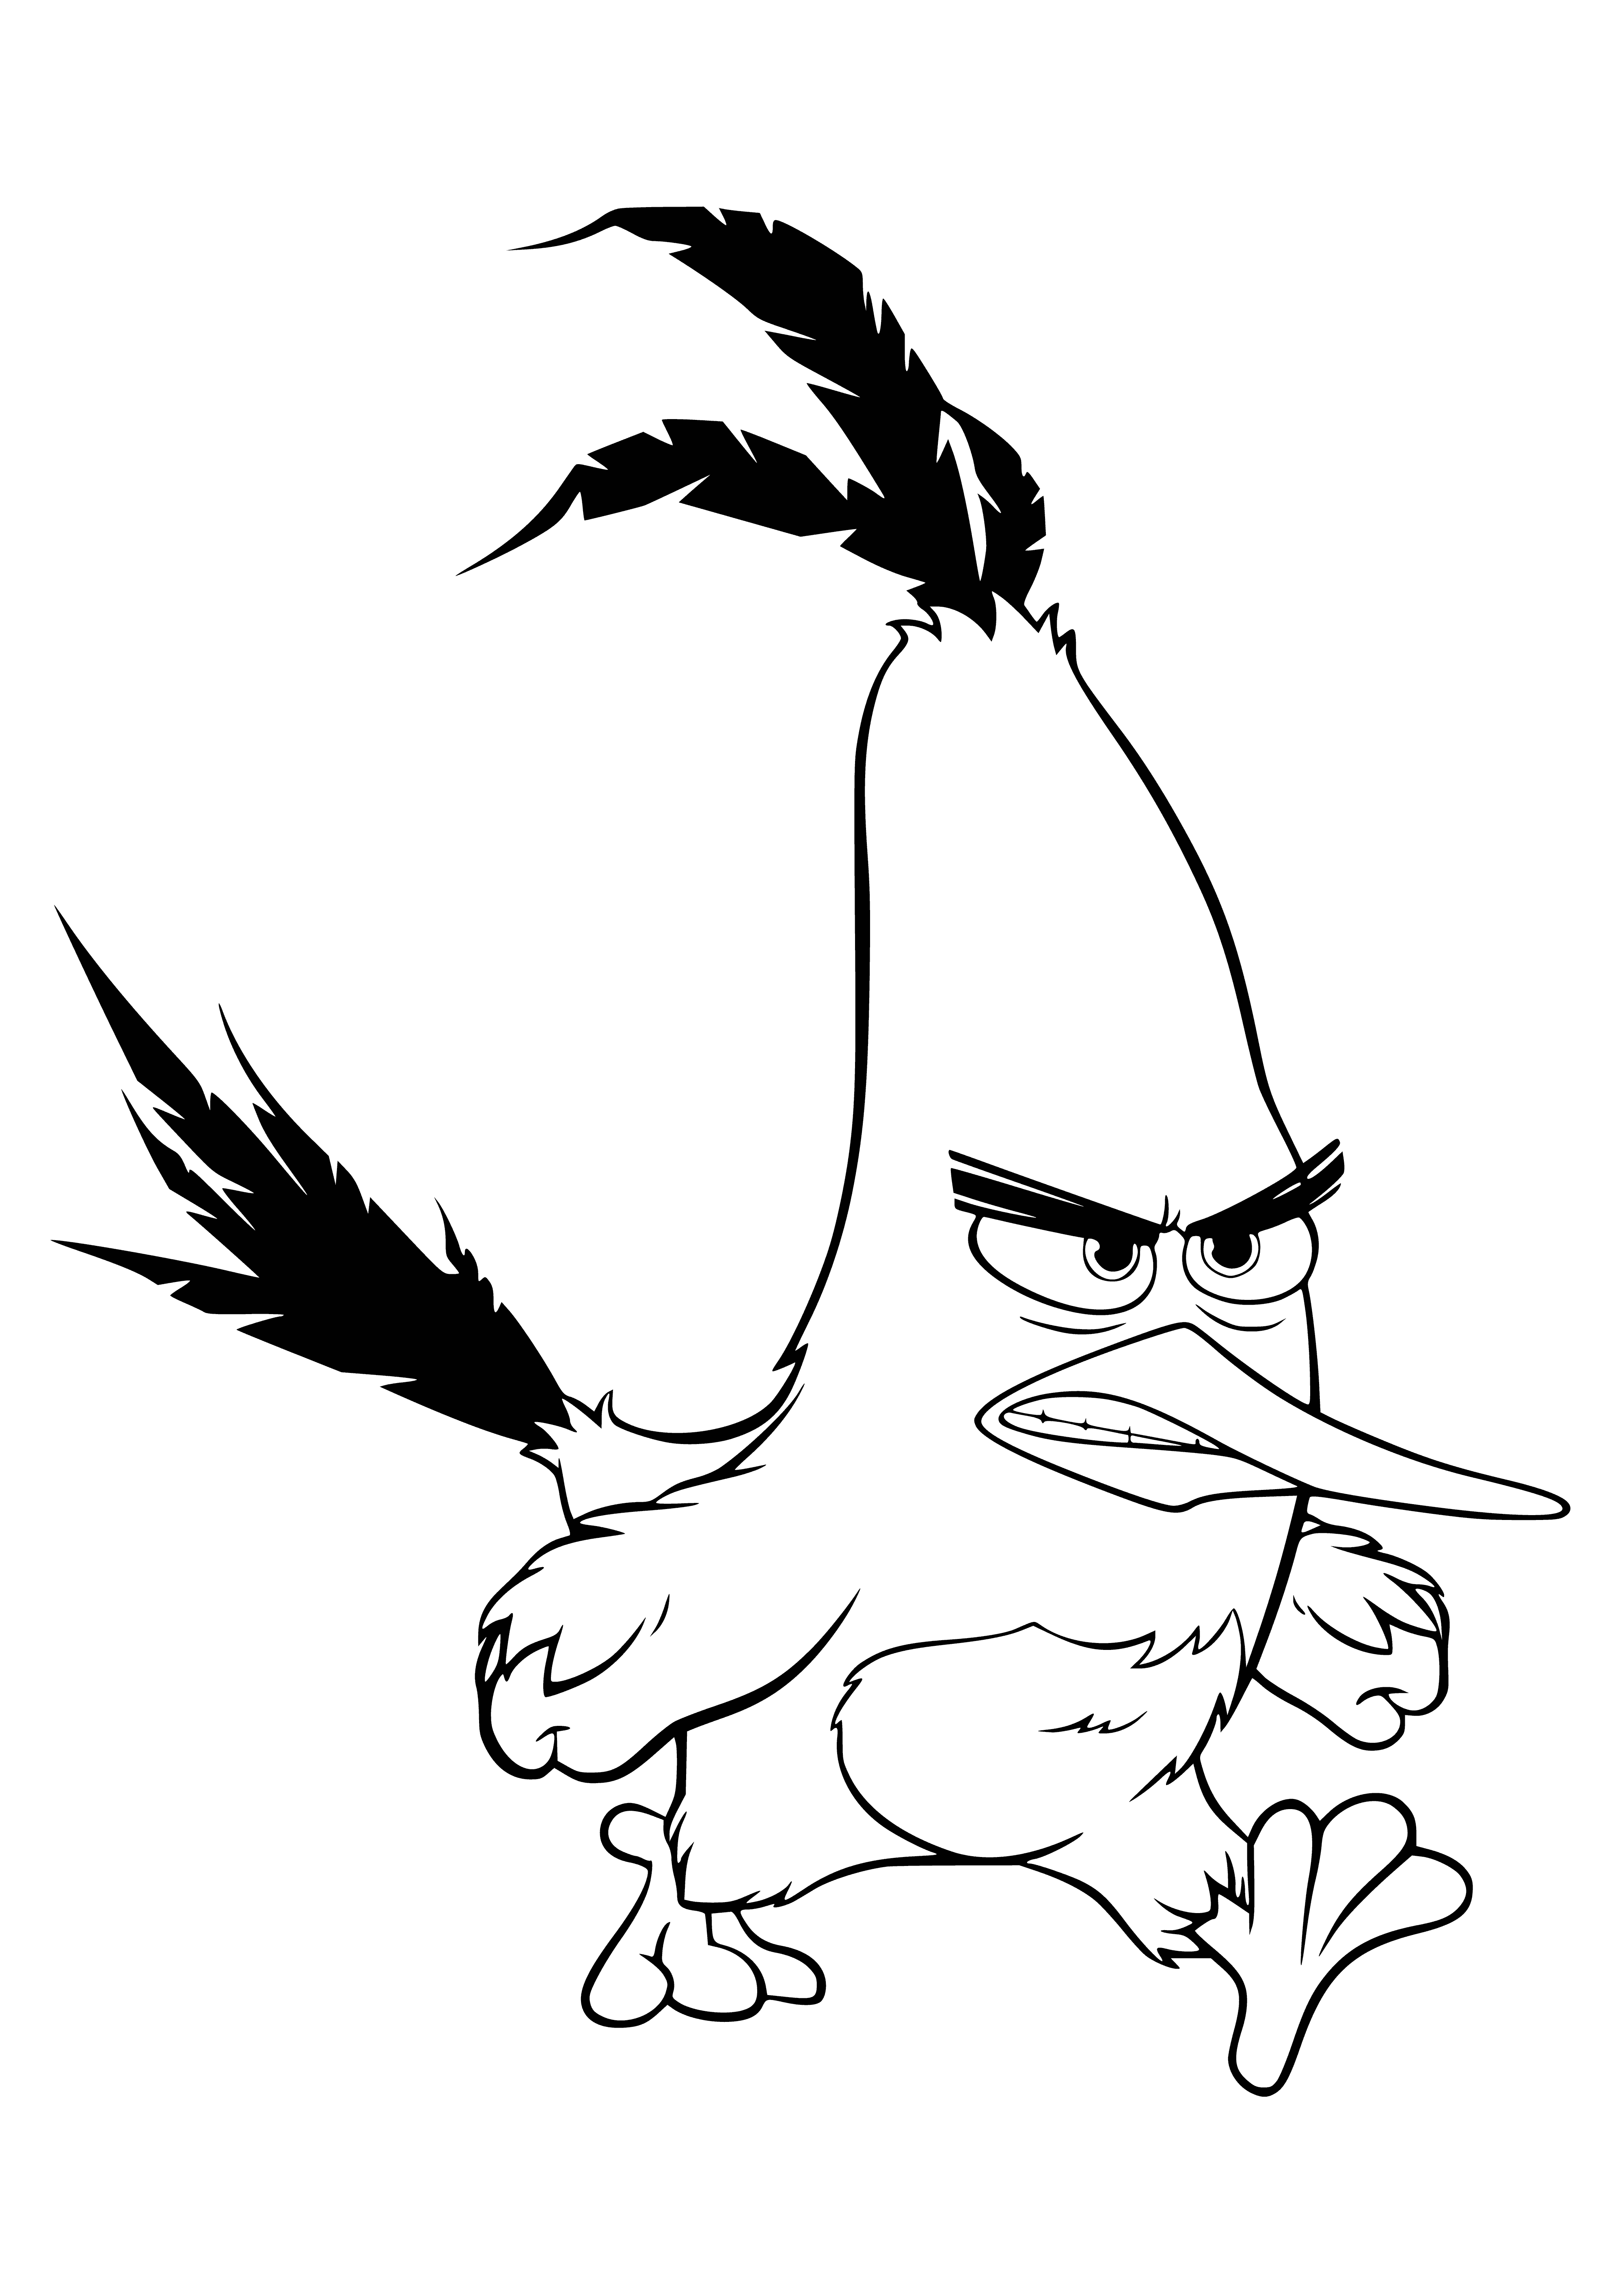 coloring page: Angry Bird Chuck is a red bird with black eyes and beak, angrily standing on a branch with spread wings.